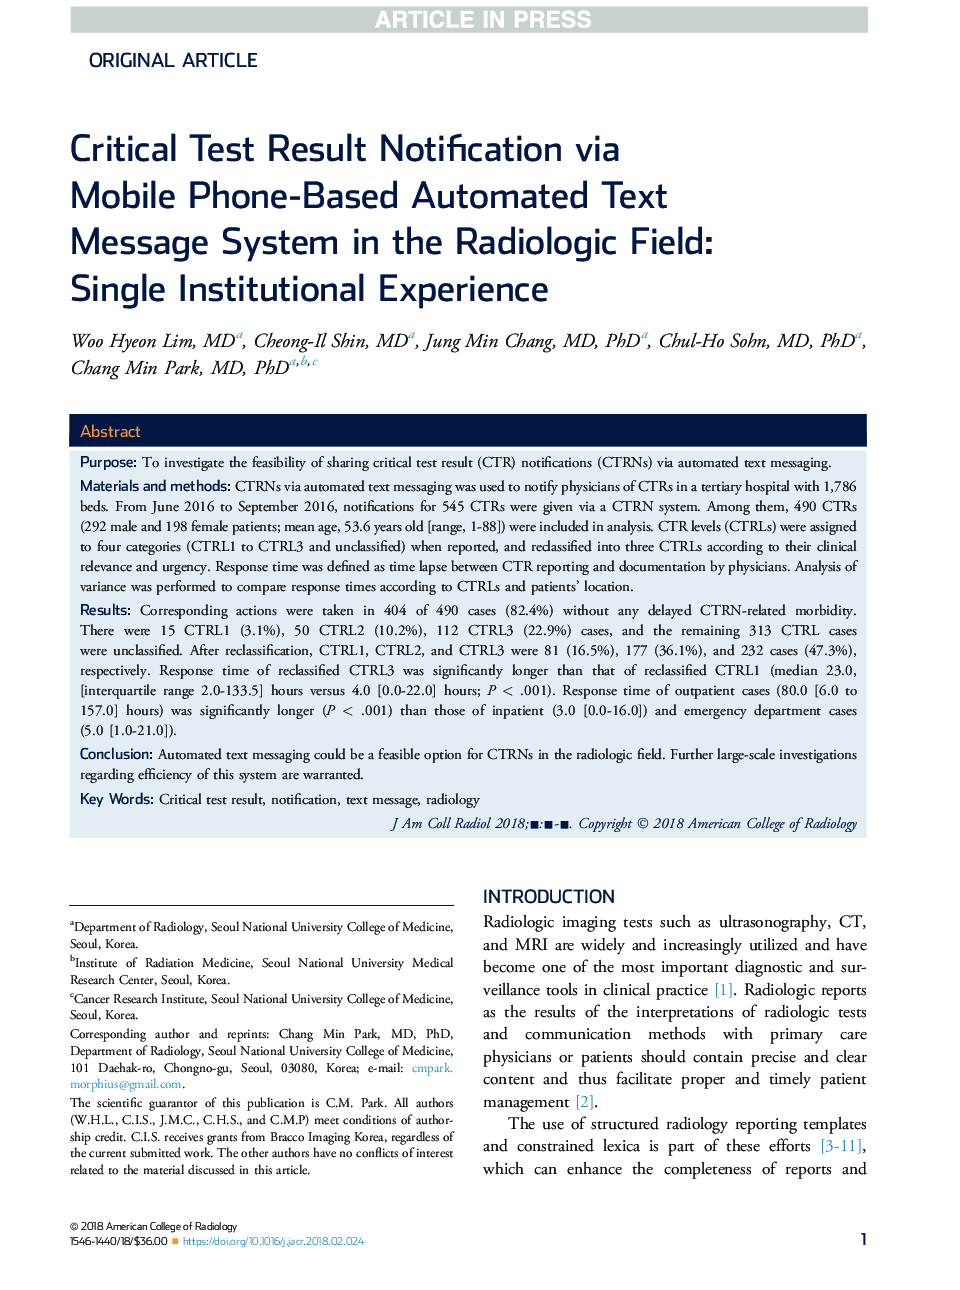 Critical Test Result Notification via MobileÂ Phone-Based Automated Text Message System in the Radiologic Field: Single Institutional Experience